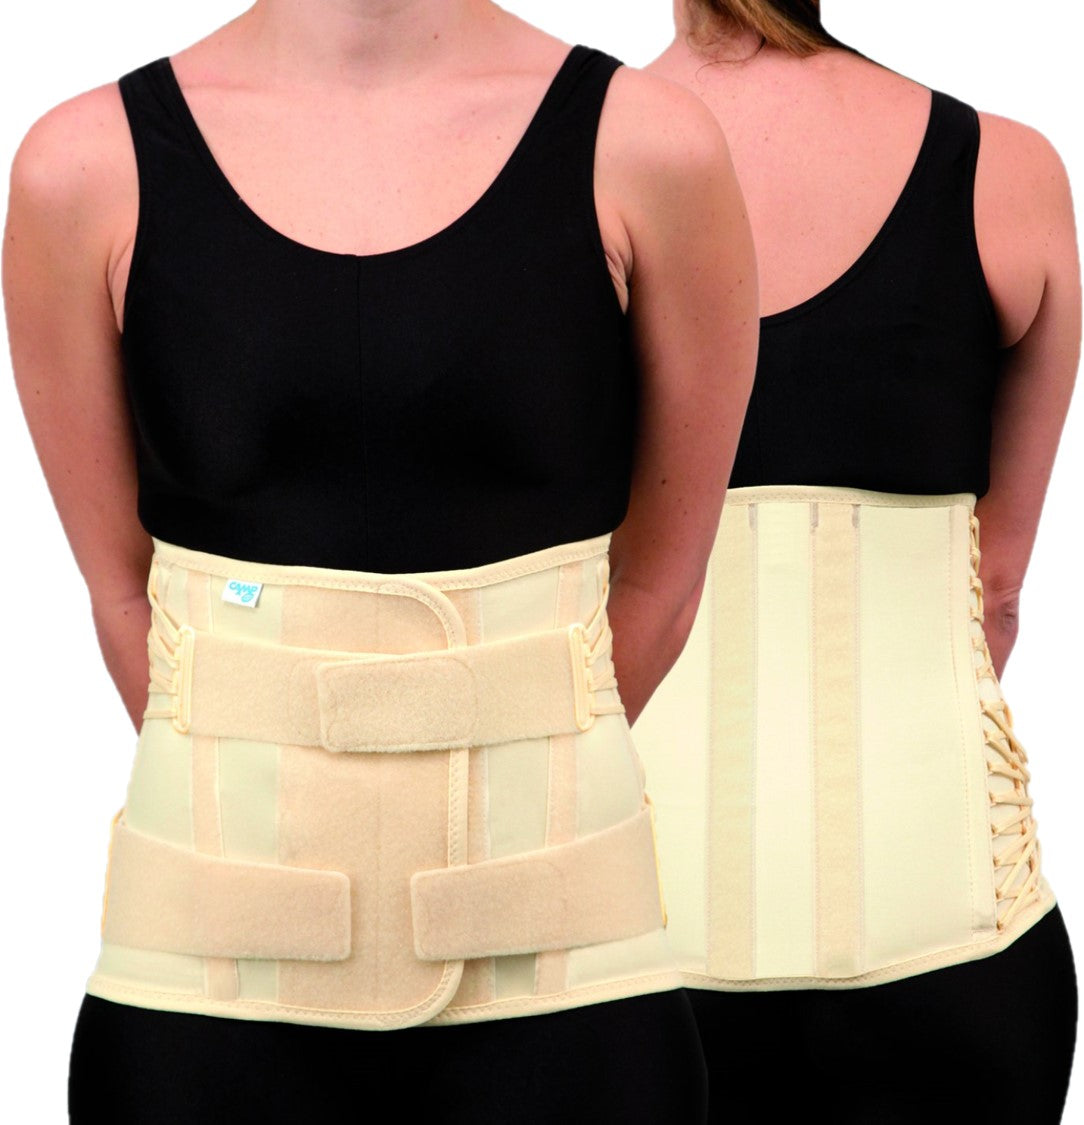 POST SURGICAL COMRESSION CORSET WITH ABDOMINAL EXTENSION (ABOVE THE KNEE)